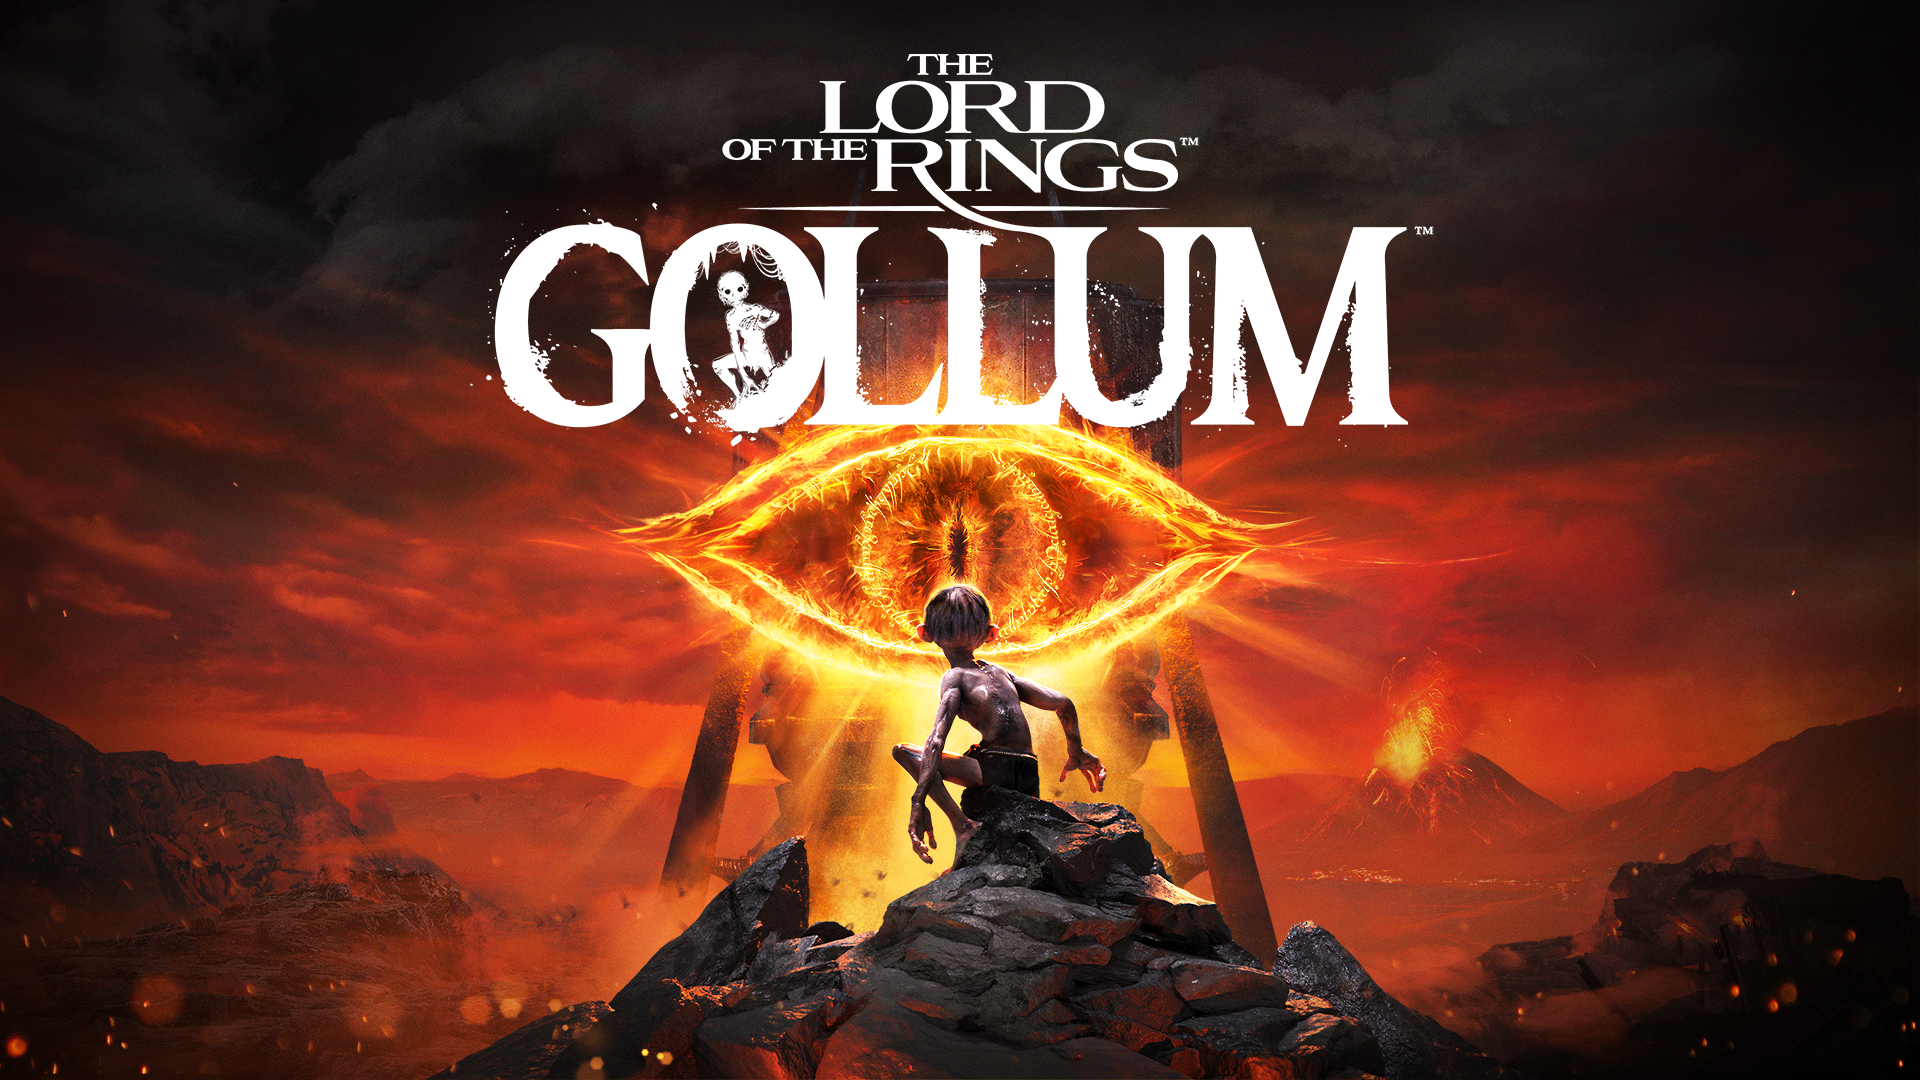 Image for The Lord of the Rings: Gollum releases this September